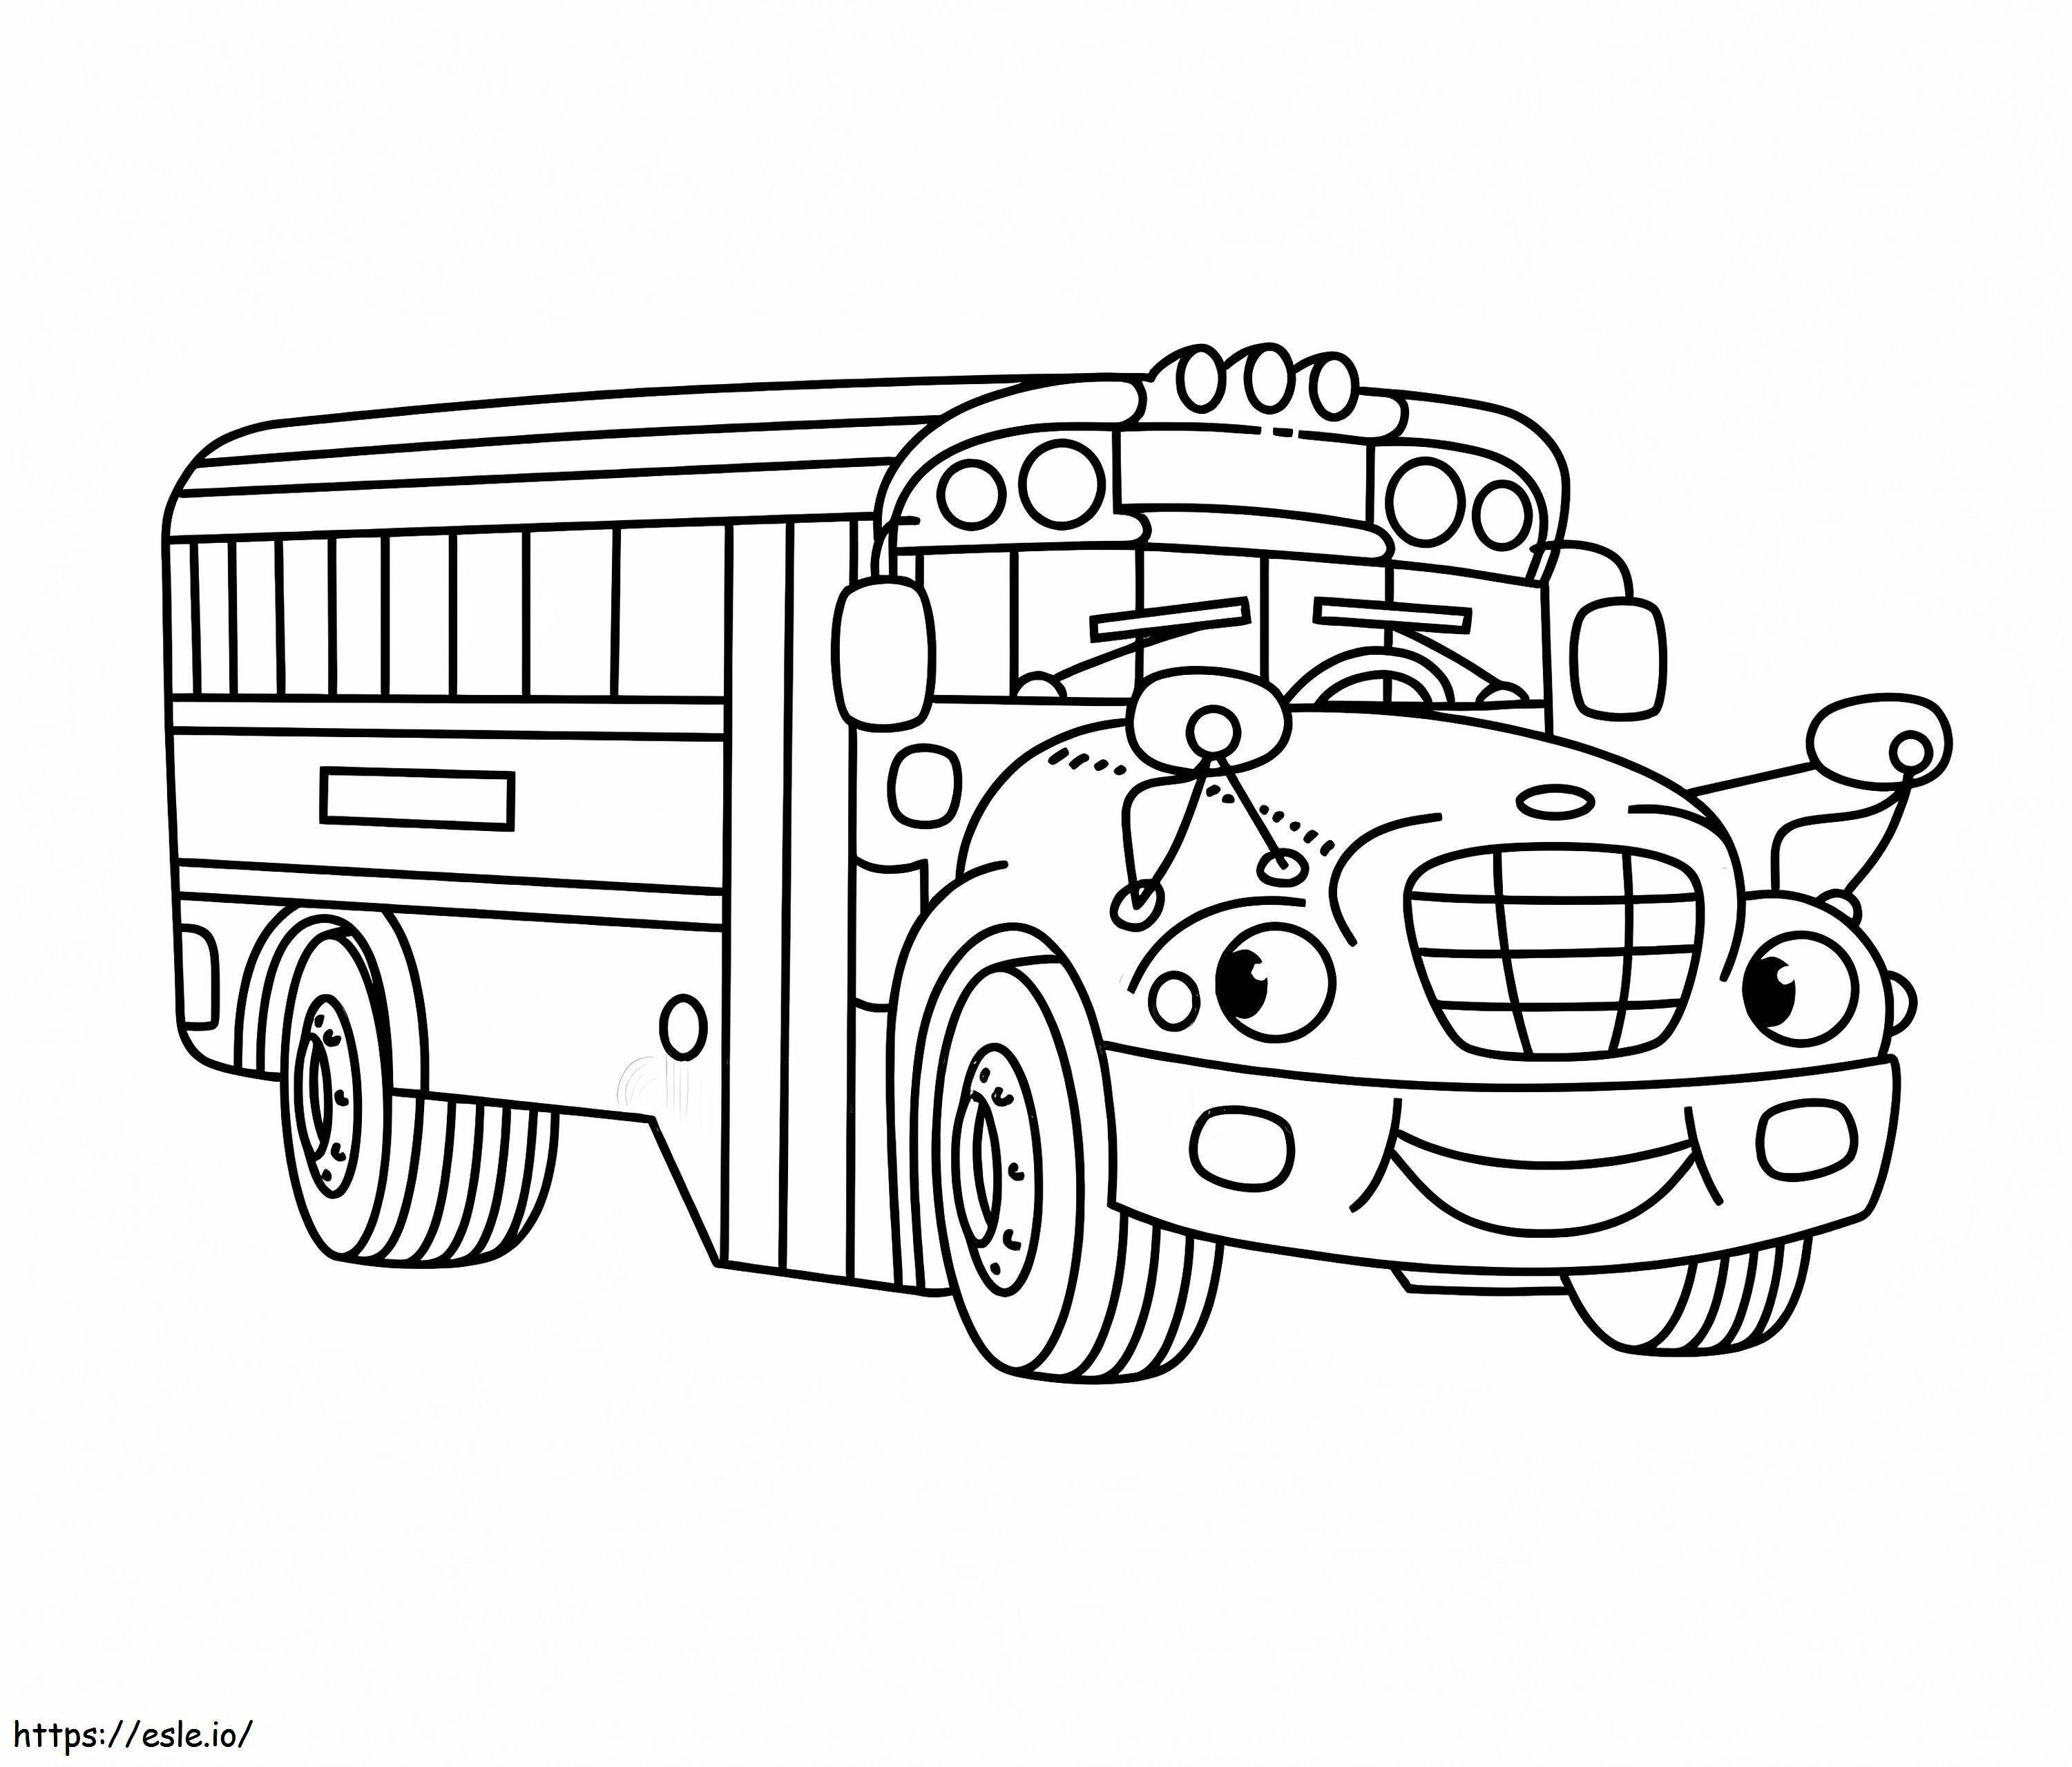 Fun Little School Bus With Eyes coloring page